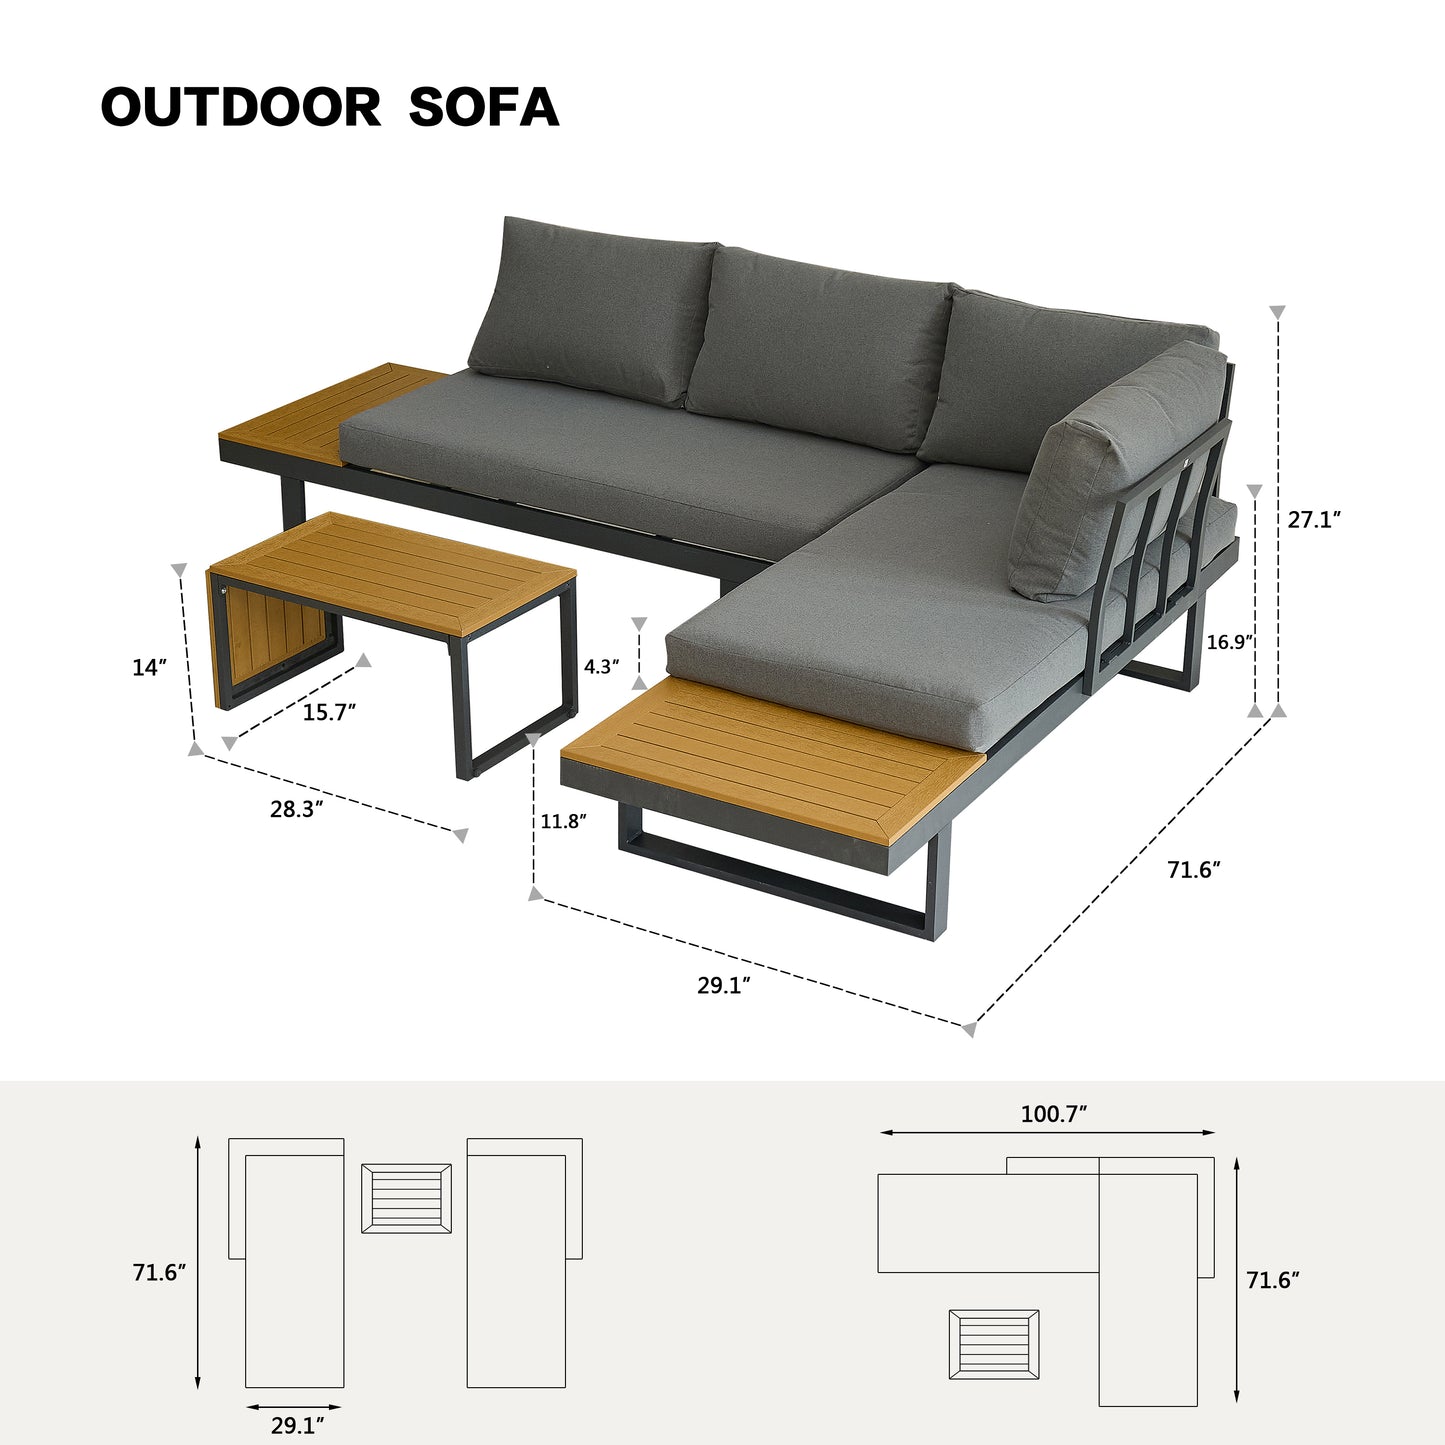 Aluminum Patio Furniture Set, L-Shaped Sectional Sofa with Composite Wood Side Table and Soft Cushion